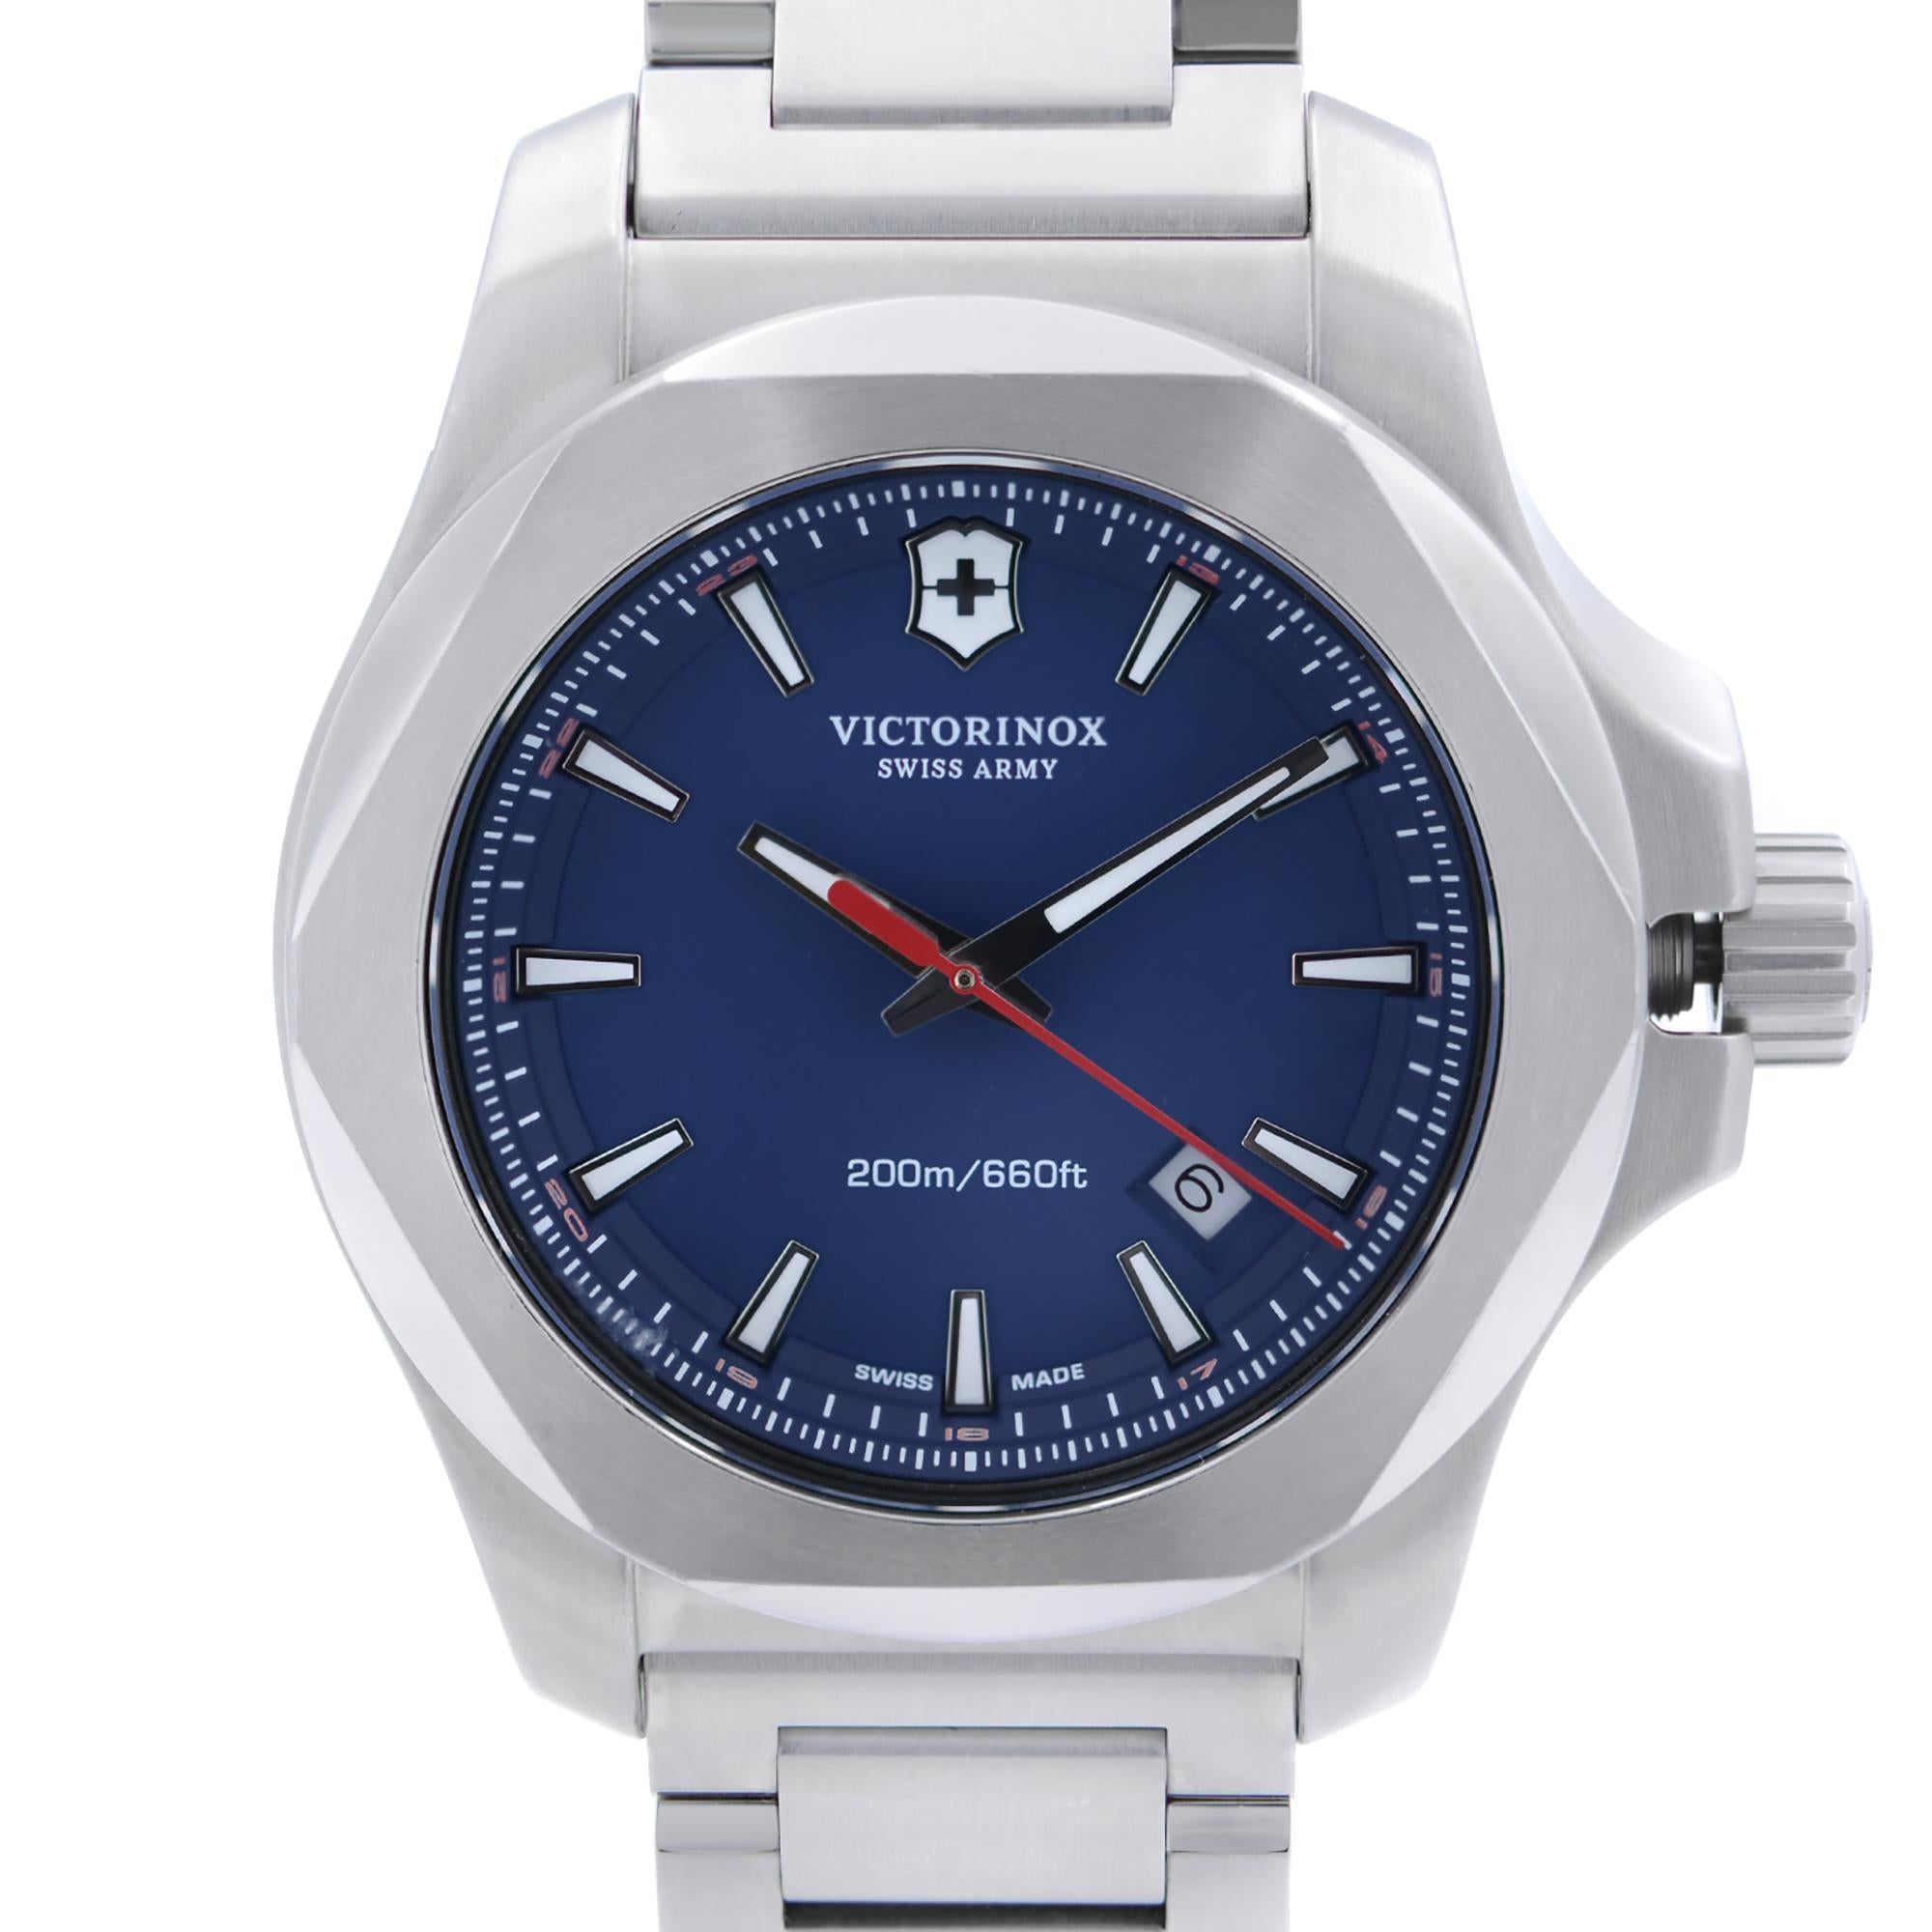 Display model Victorinox Swiss Army I.N.O.X. Stainless Steel 42 mm Blue Dial Men's Quartz Watch 241724.1. This Beautiful Timepiece Features: Brushed Stainless Steel Case and Bracelet. Fixed Stainless Steel Bezel. Blue Dial with Luminous Silver-tone